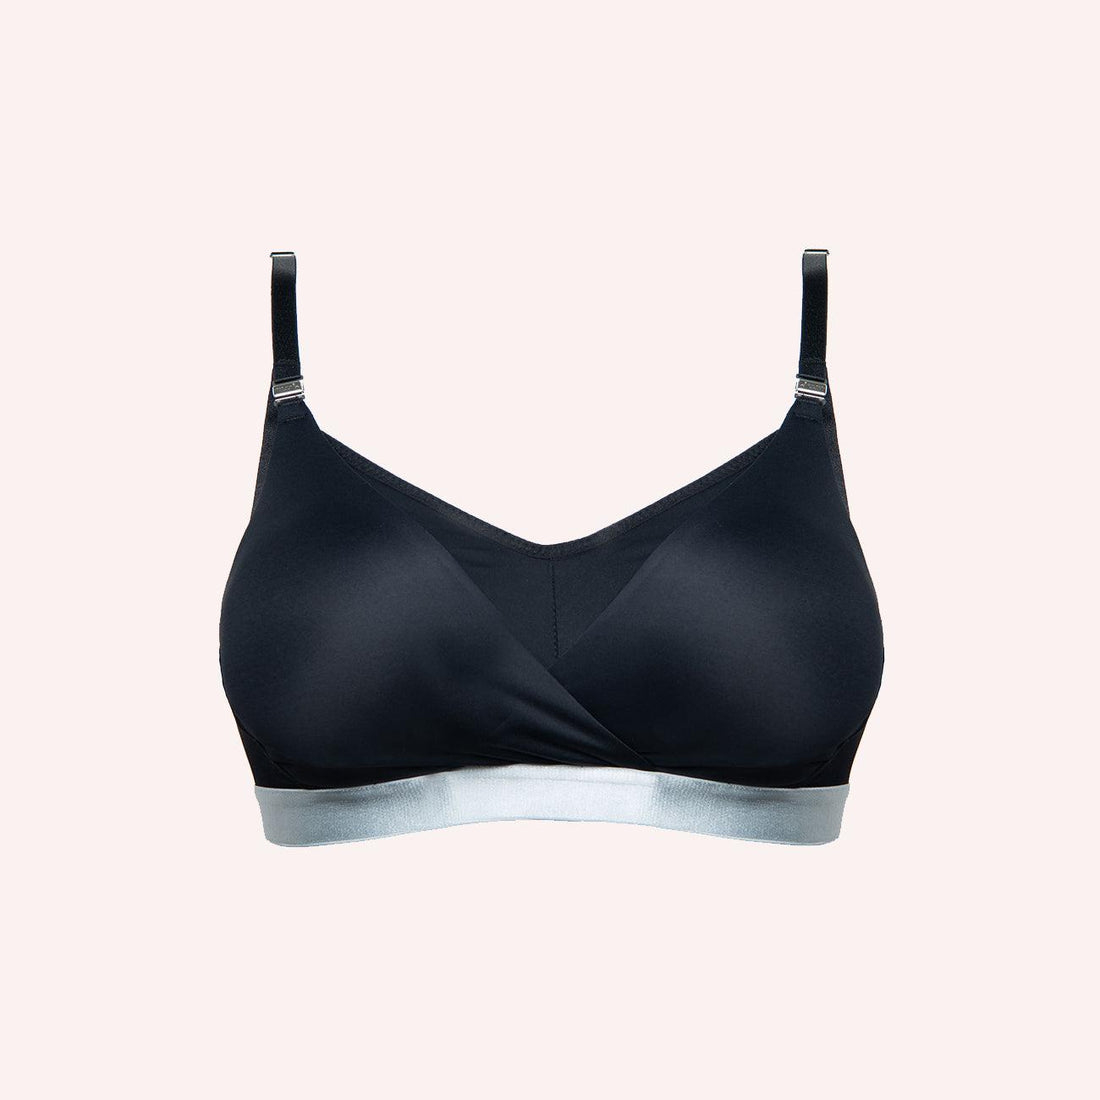 Five Need To Knows About Choosing Your Nursing Bra – Peachymama